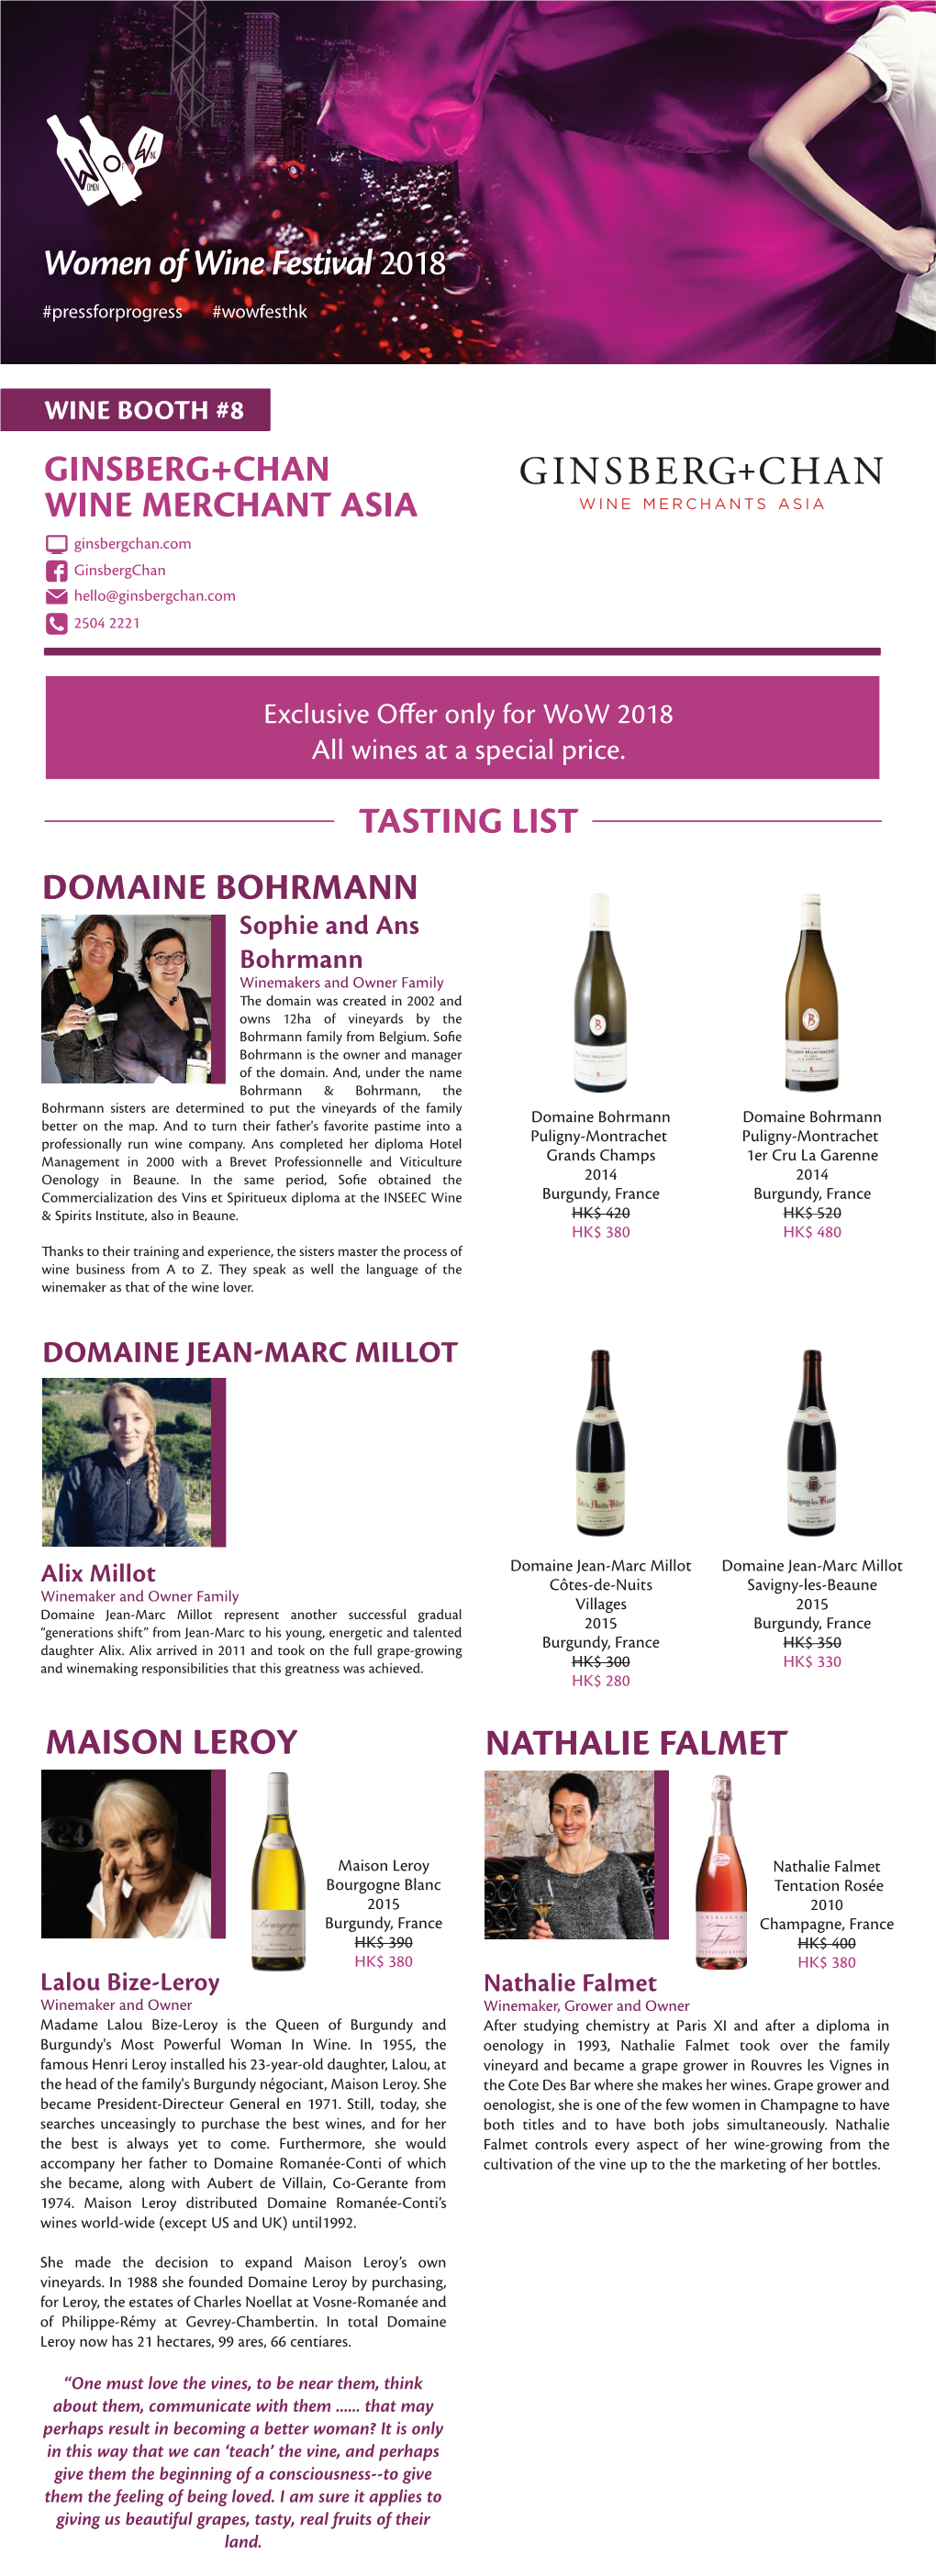 DOMAINE BOHRMANN Sophie and Ans Bohrmann Winemakers and Owner Family E Domain Was Created in 2002 and Owns 12Ha of Vineyards by the Bohrmann Family from Belgium